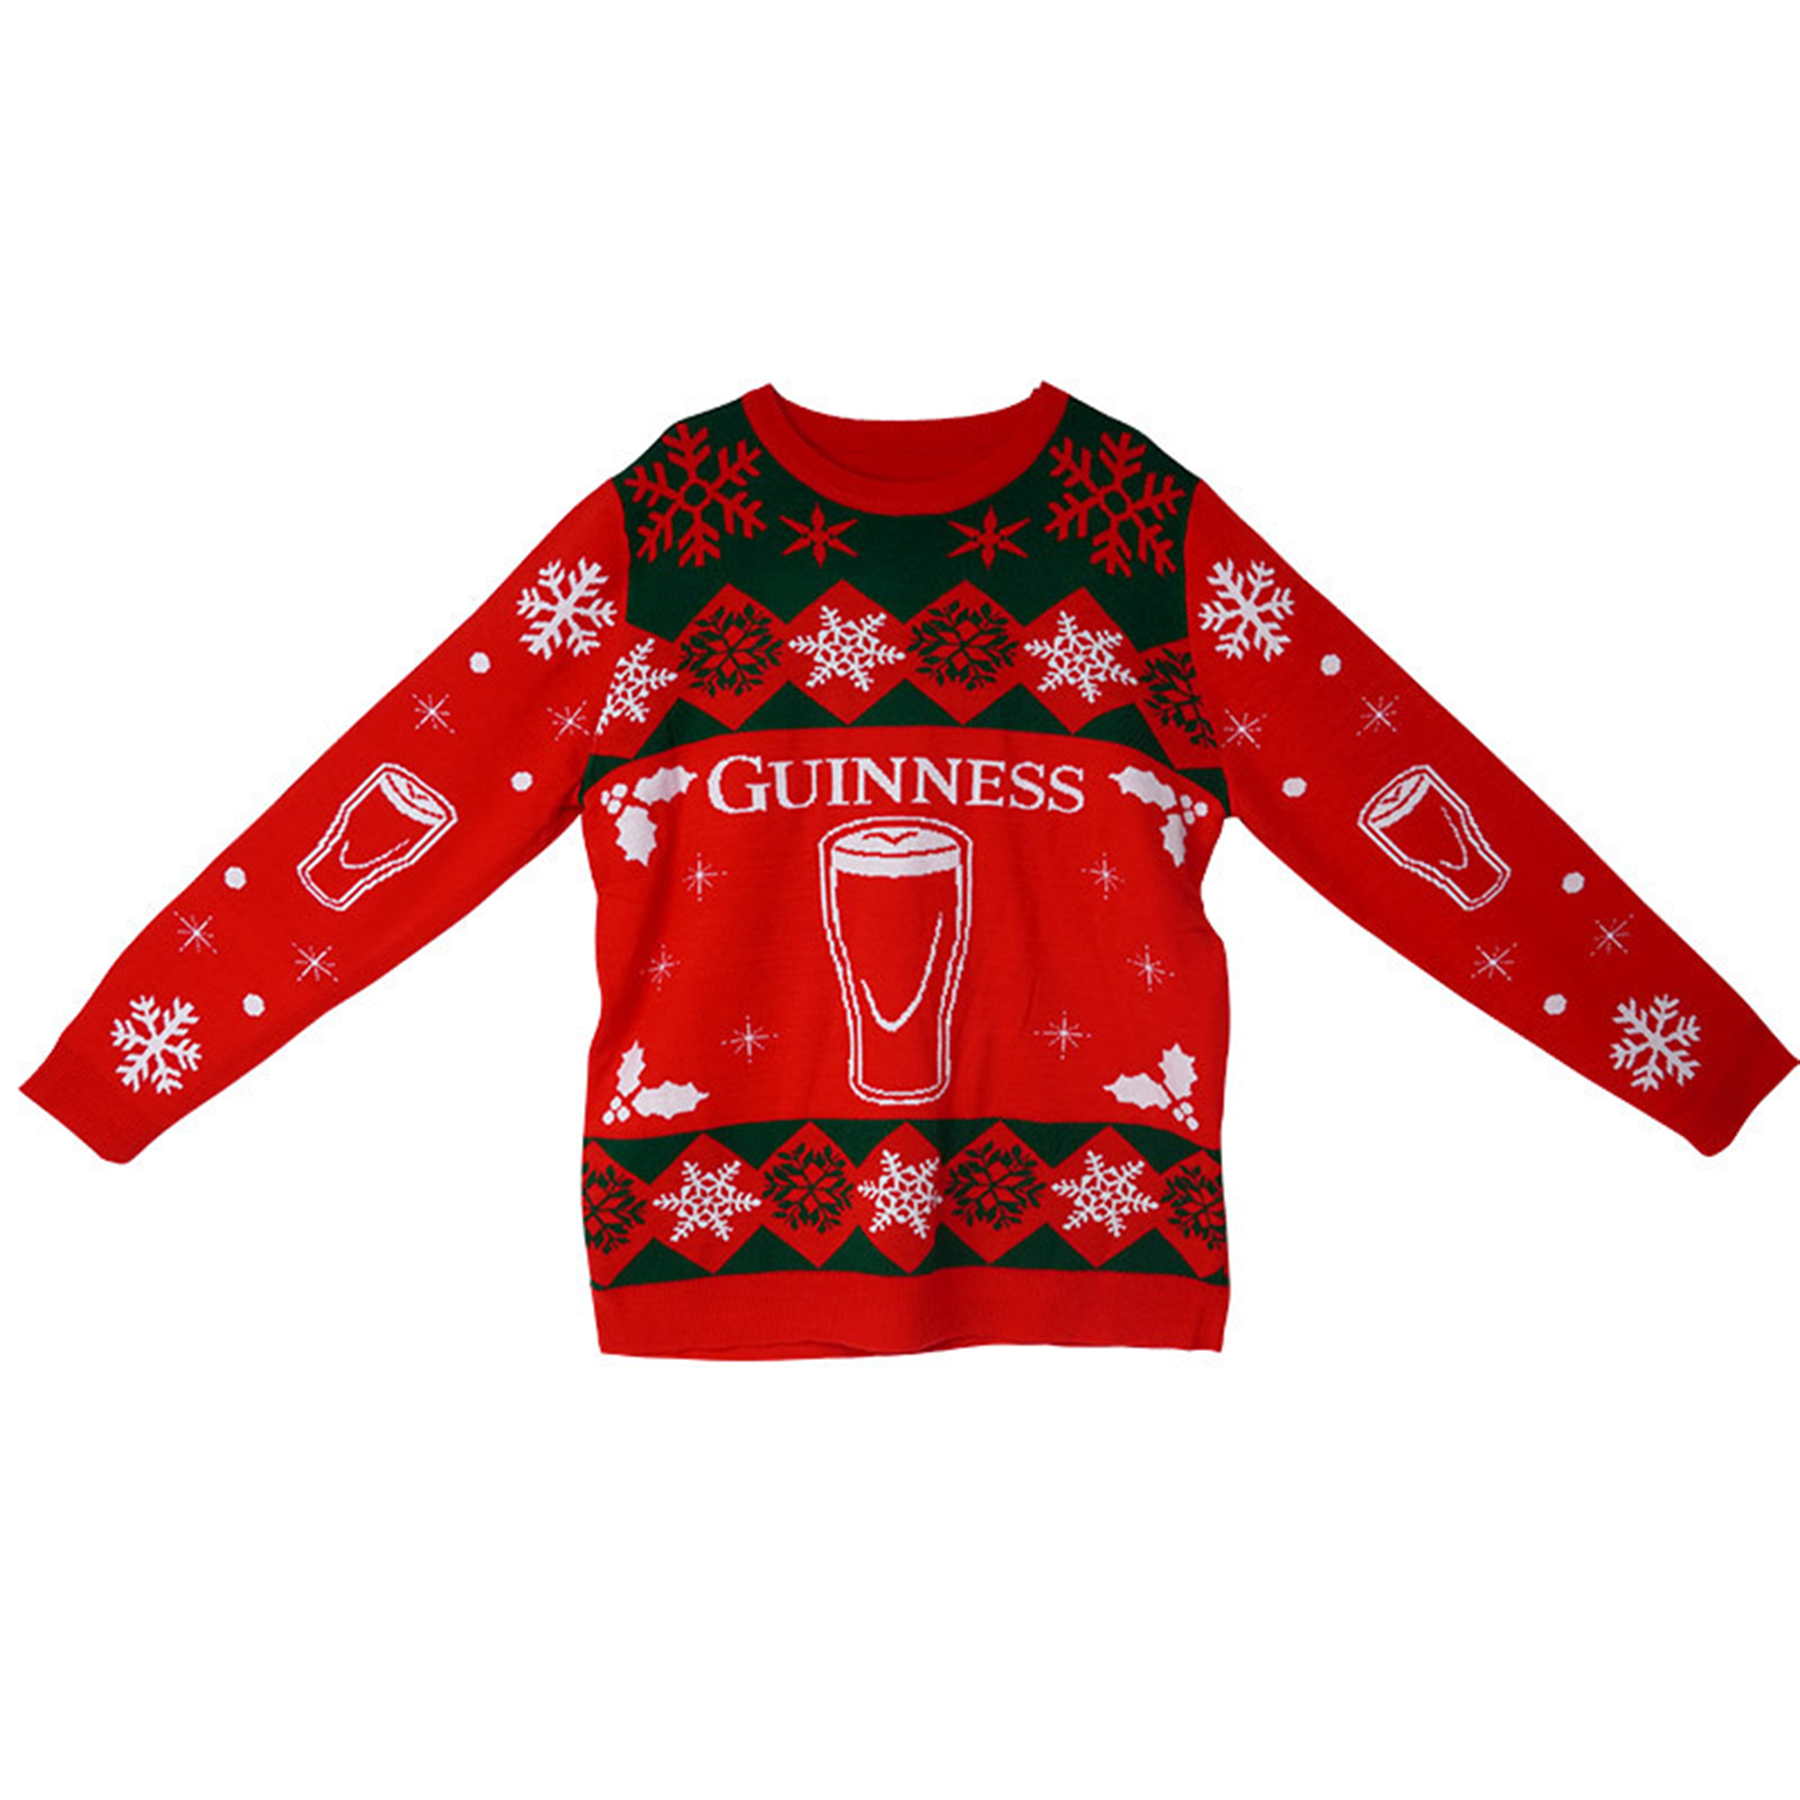  Ugly Christmas Sweaters for Women Men